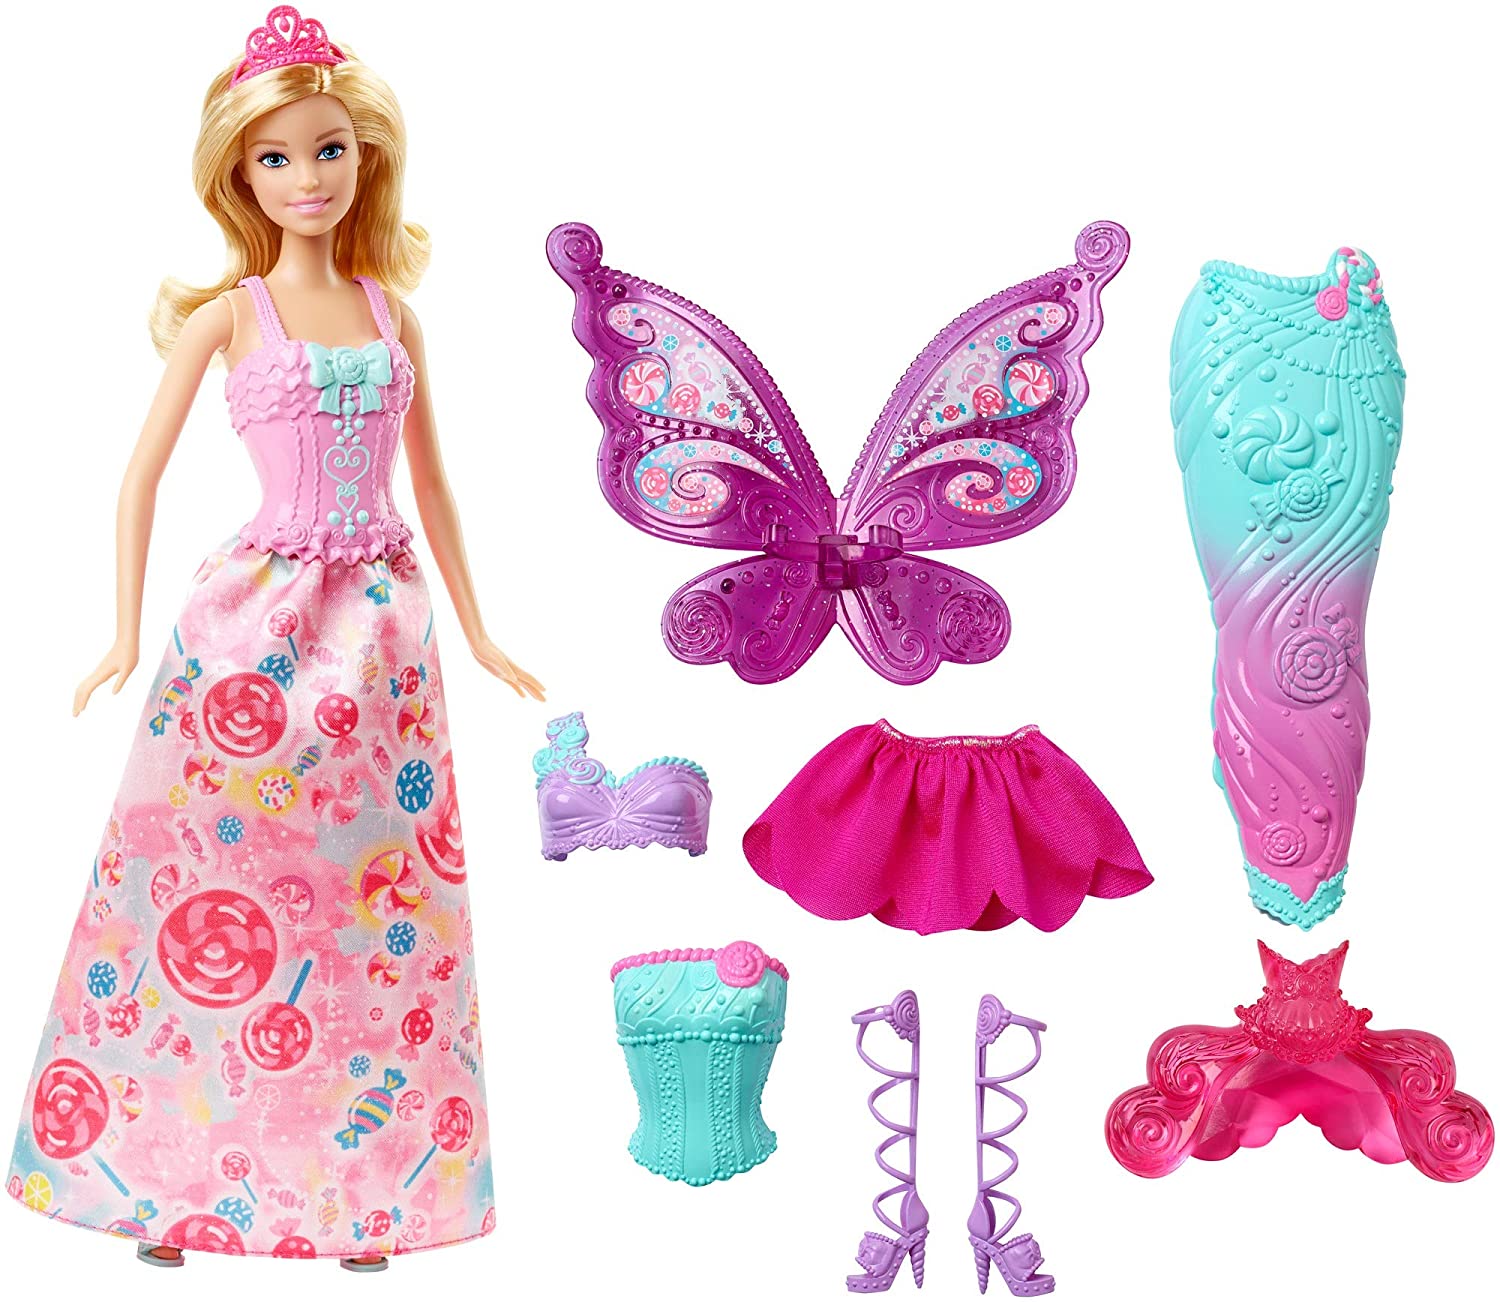 Barbie Doll and Accessories